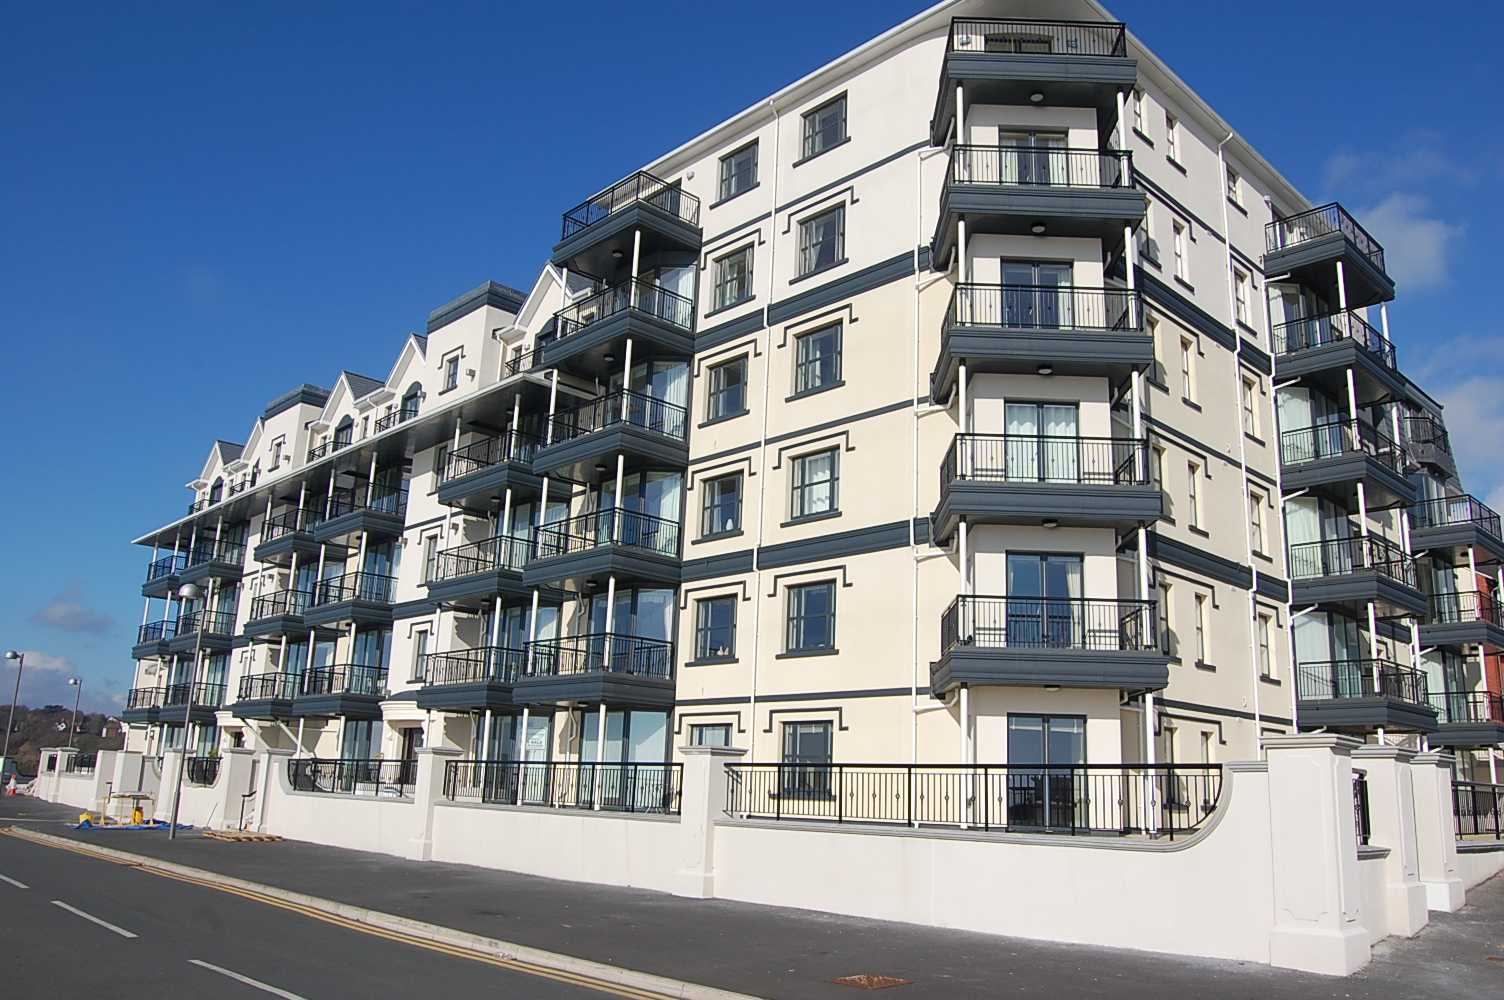 Condominium in Isle of Whithorn, Dumfries and Galloway 10015397